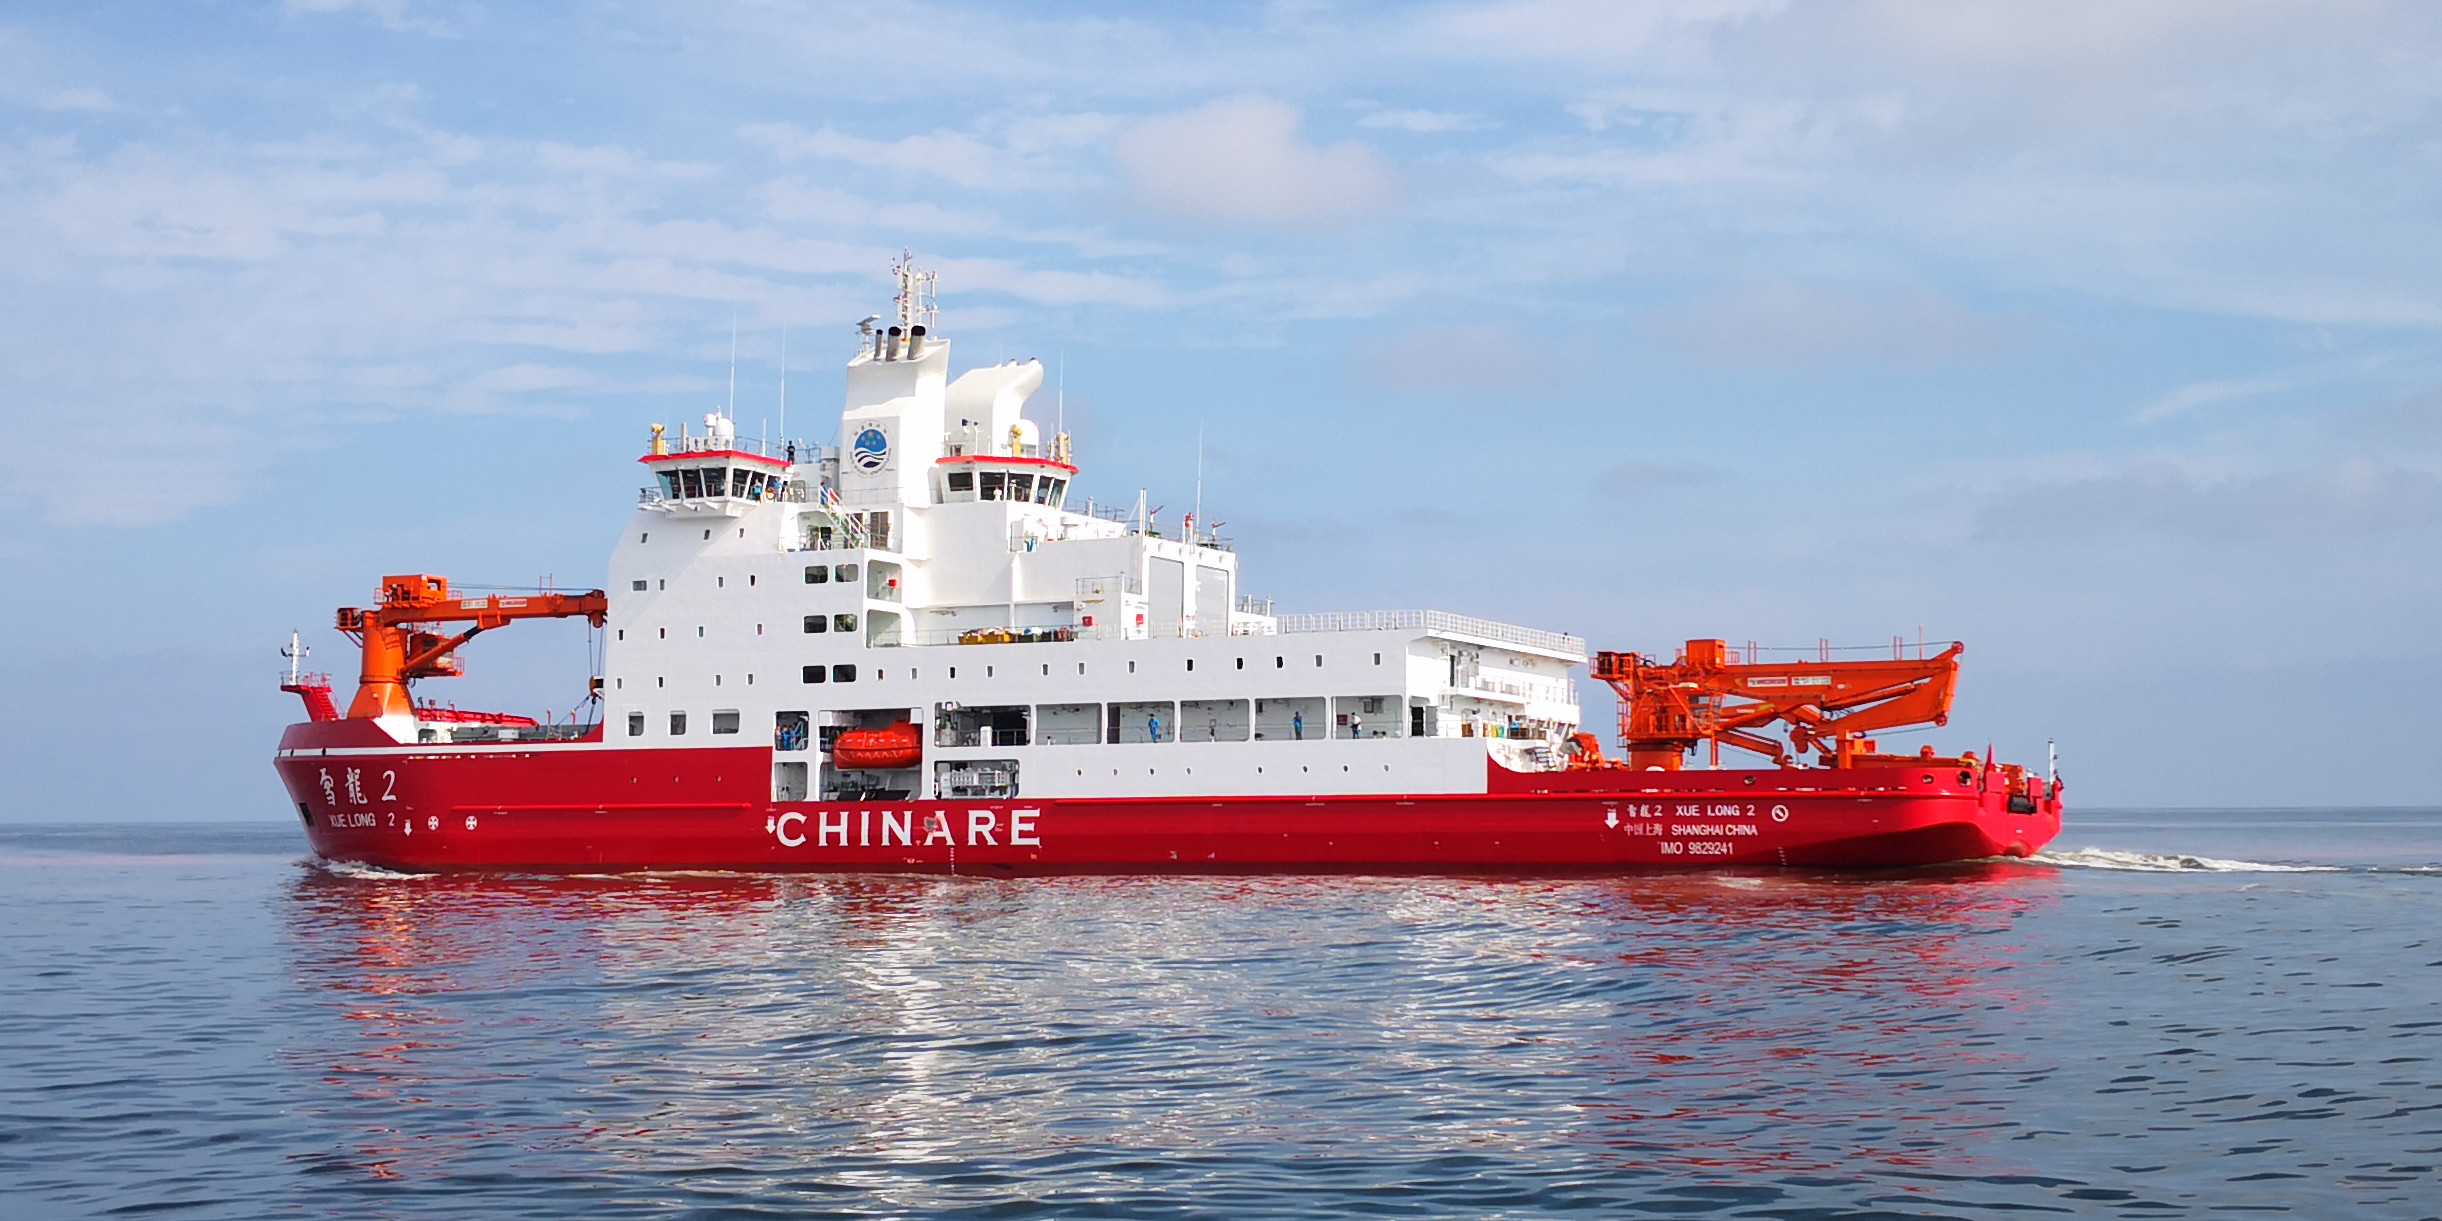 MacGregor deck handling solution supports China’s Xue Long 2 icebreaker operation